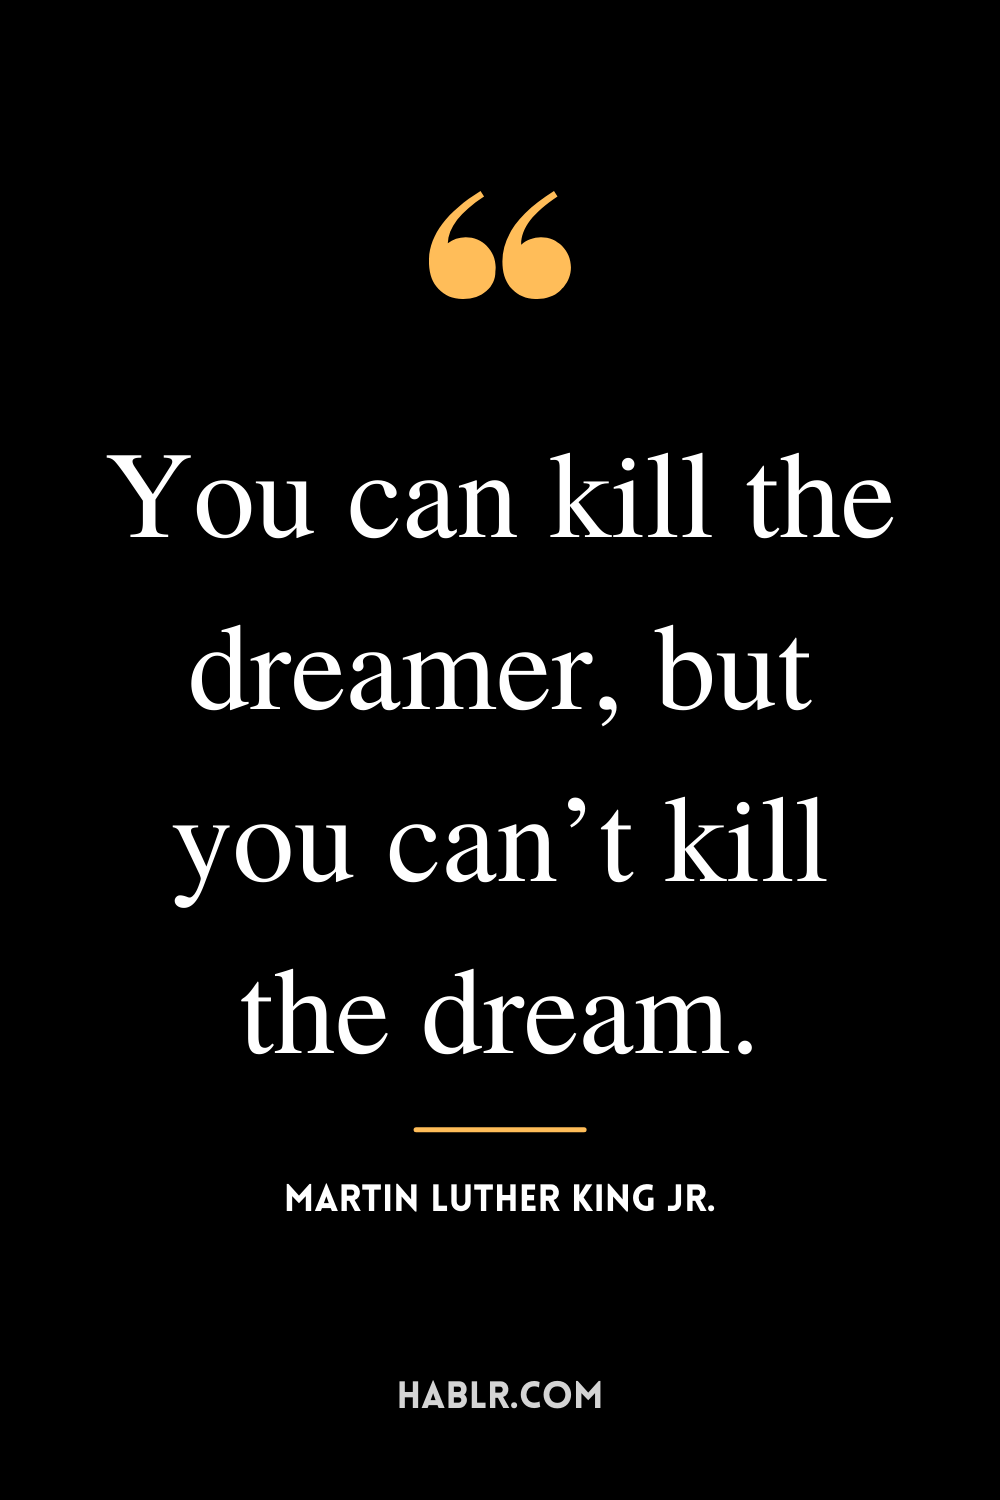 “You can kill the dreamer, but you can’t kill the dream.” -Martin Luther King Jr.